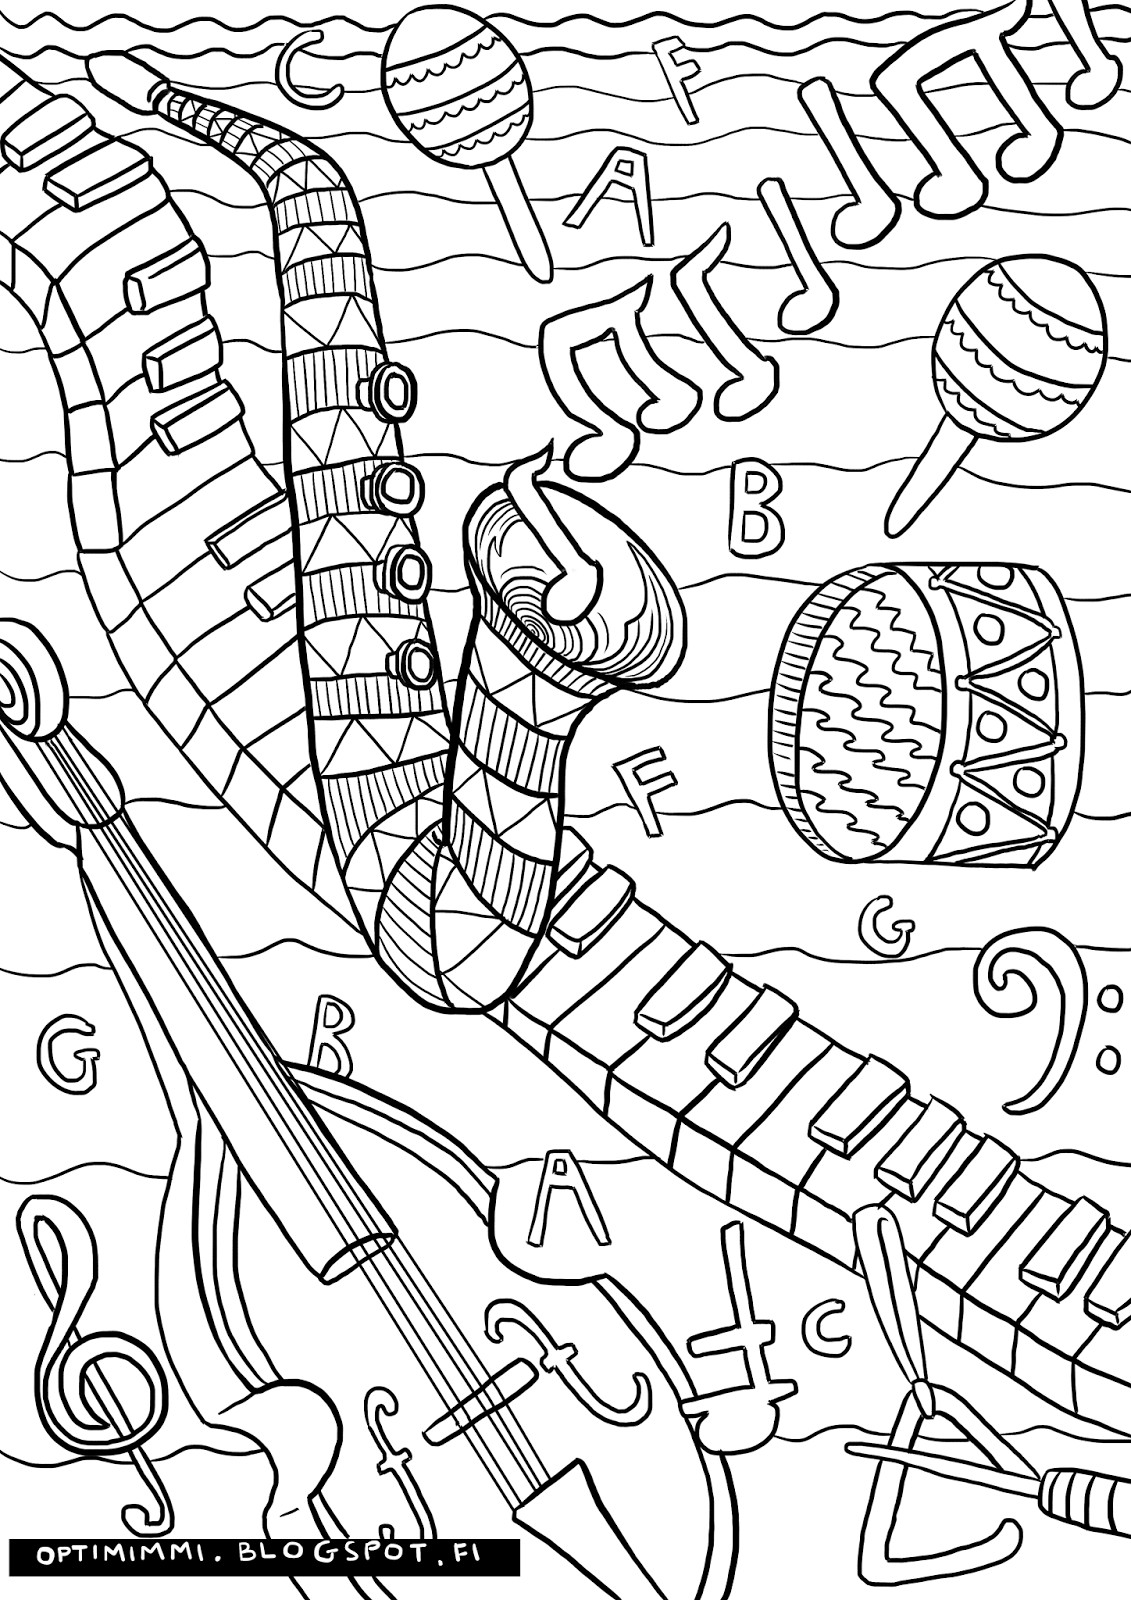 Music Coloring Pages Printable
 OPTIMIMMI 2016 Coloring pages 2016 Värityskuvat